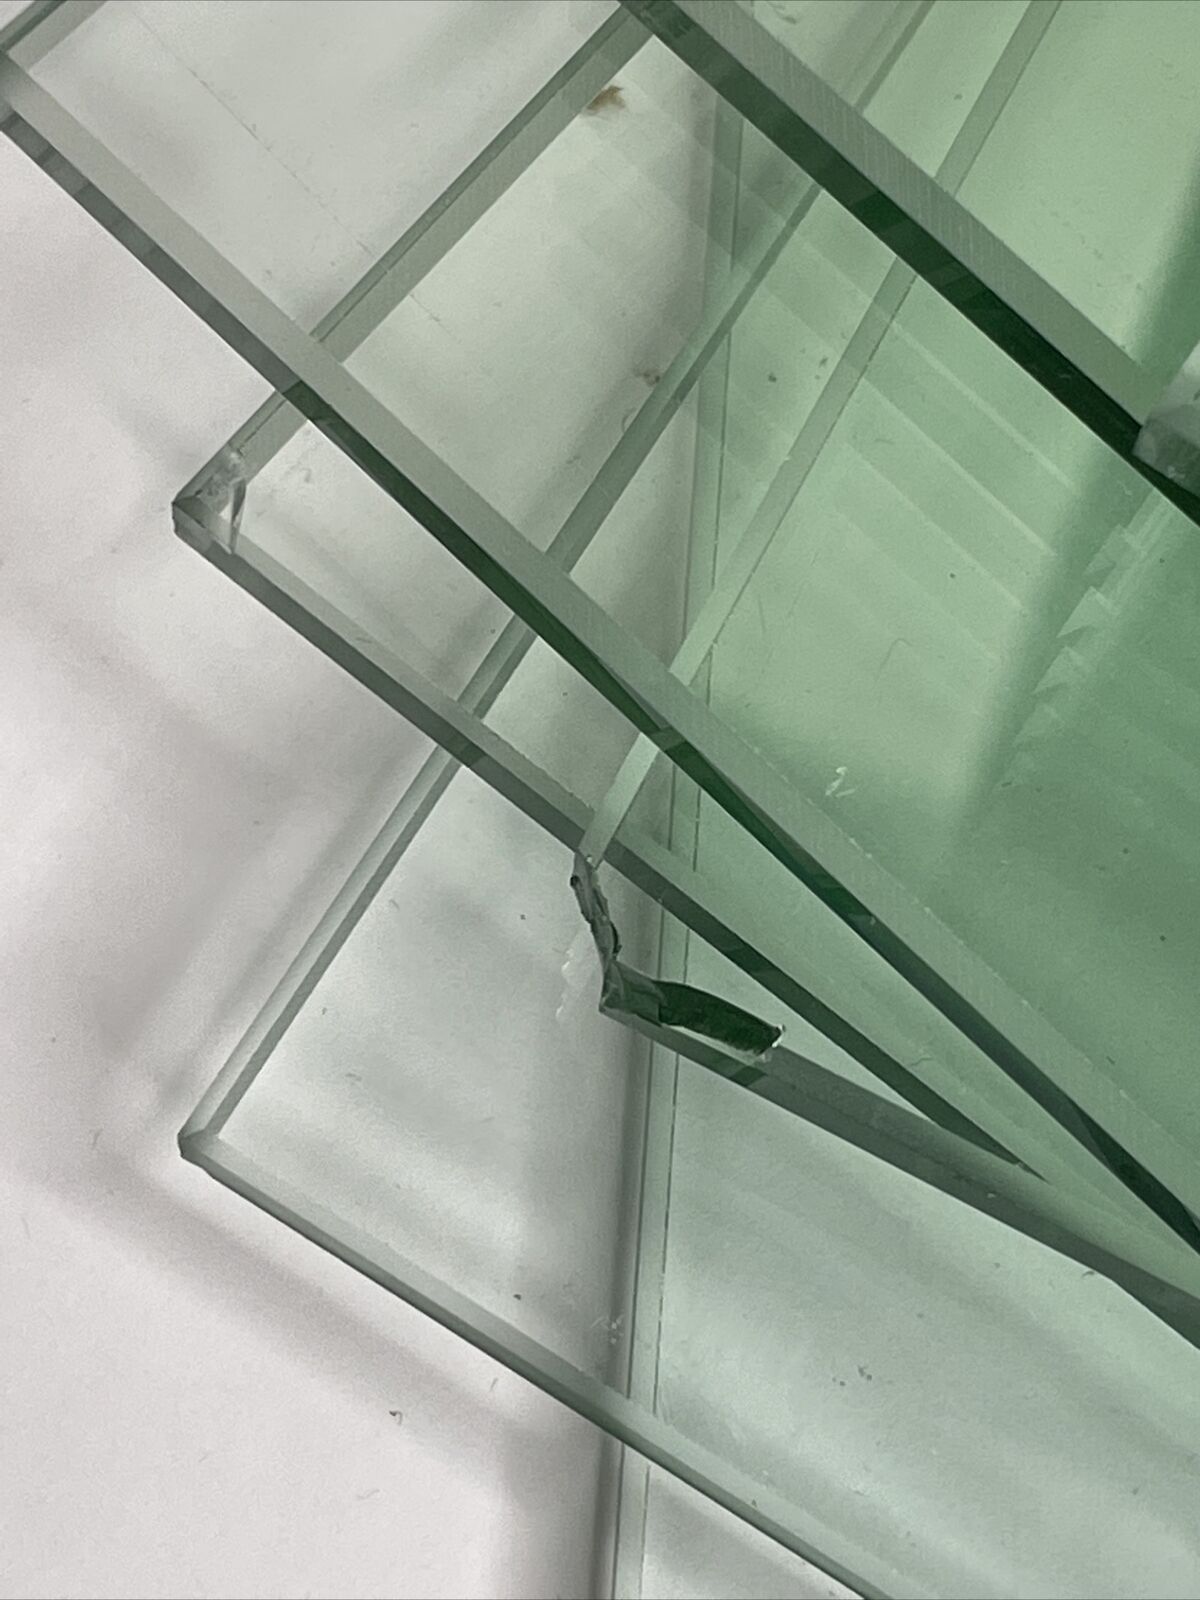 LOT OF 30 -  Square Clear Glass 6" x 6" (nominal) x 6mm Thick - Flat Polish Edge Unbranded Does Not Apply - фотография #5